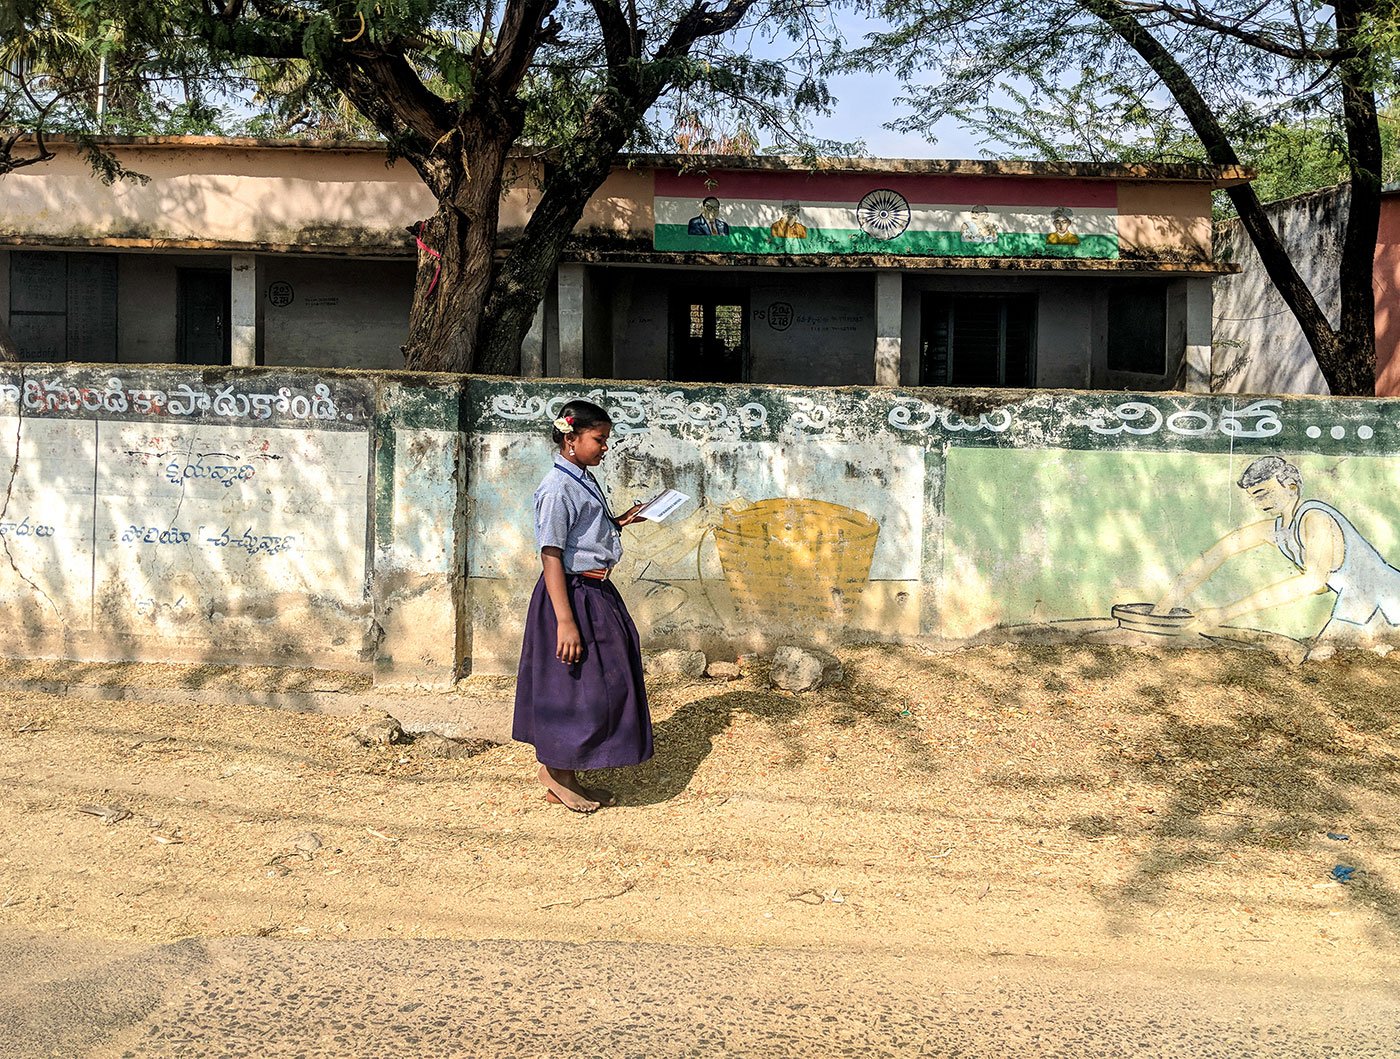 A young girl walking on a village street next to a wall with illustrations painted on it